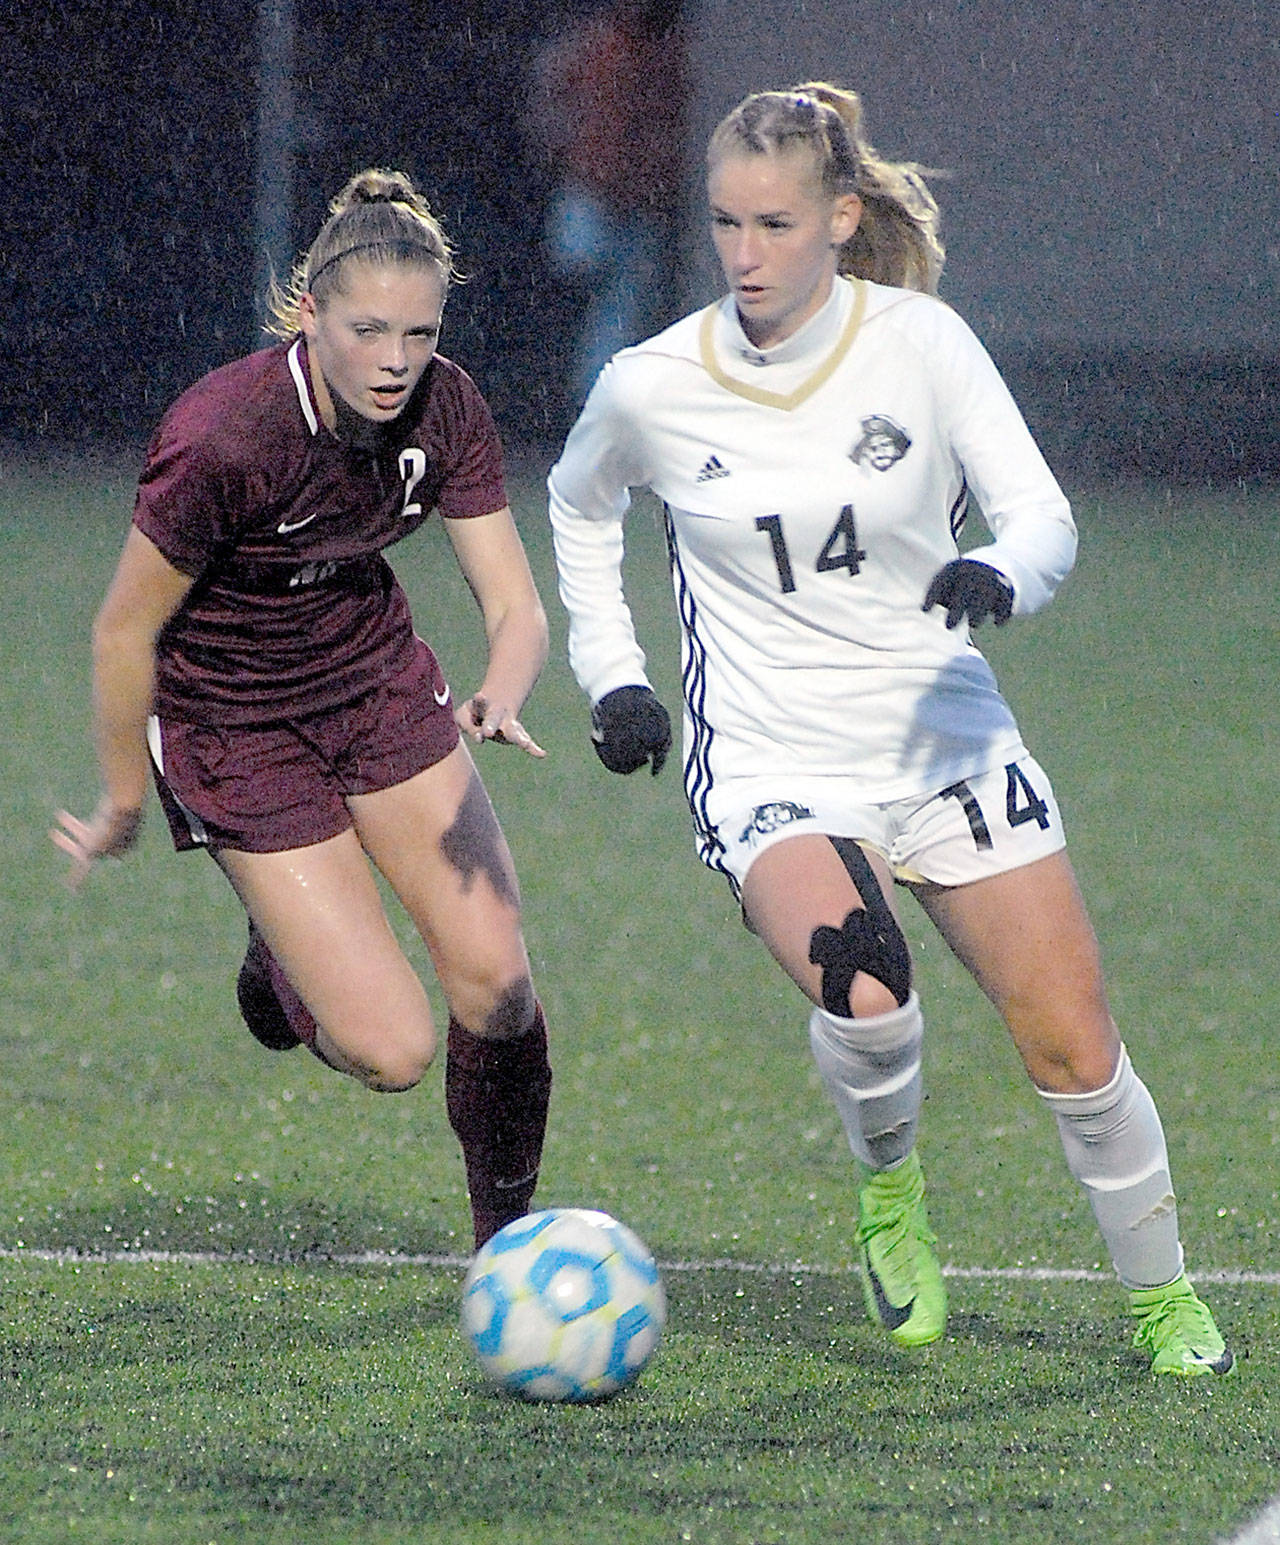 Peninsula’s Taylor Graham, right, slips past the defense of North Idaho’s Breanne Kuni during their NWAC quarterfinal match on Saturday under the lights at Wally Sigmar Field in Port Angeles. (Keith Thorpe/Peninsula Daily News)